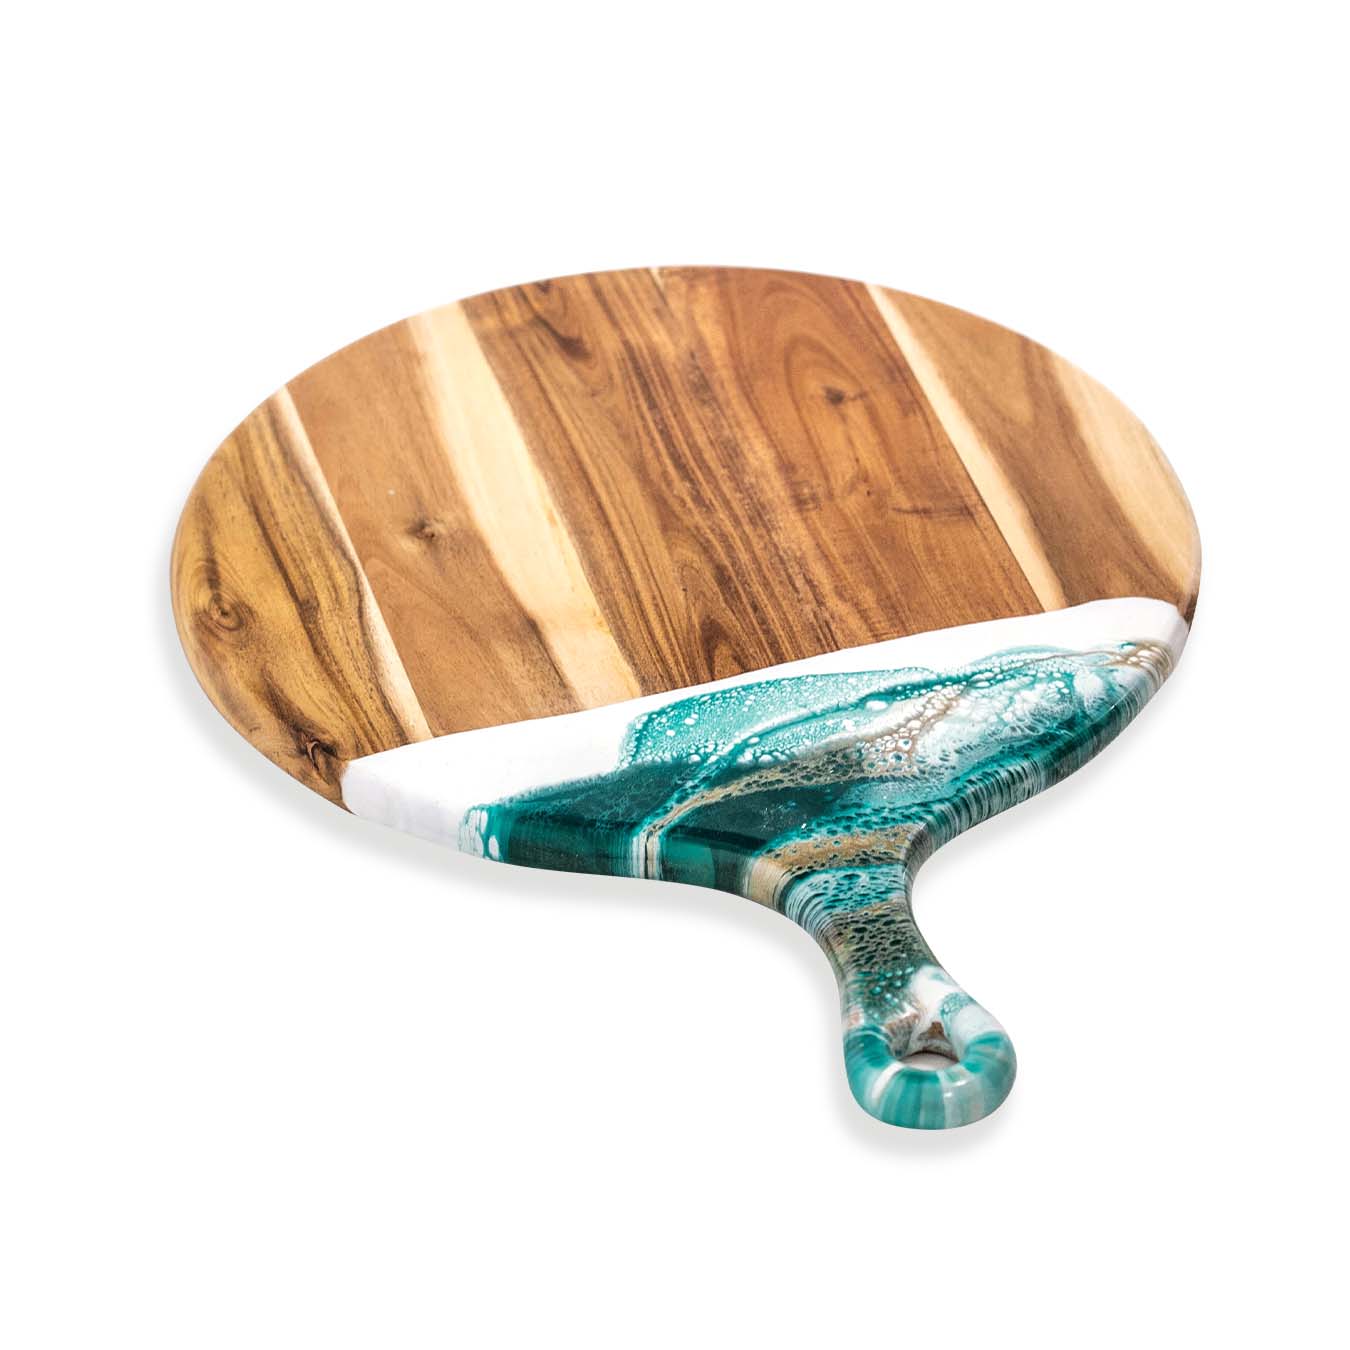 Lynn & Liana Serveware Acacia Resin Cheeseboard - Emerald Jewel - 12" Round W/Handle available at The Good Life Boutique